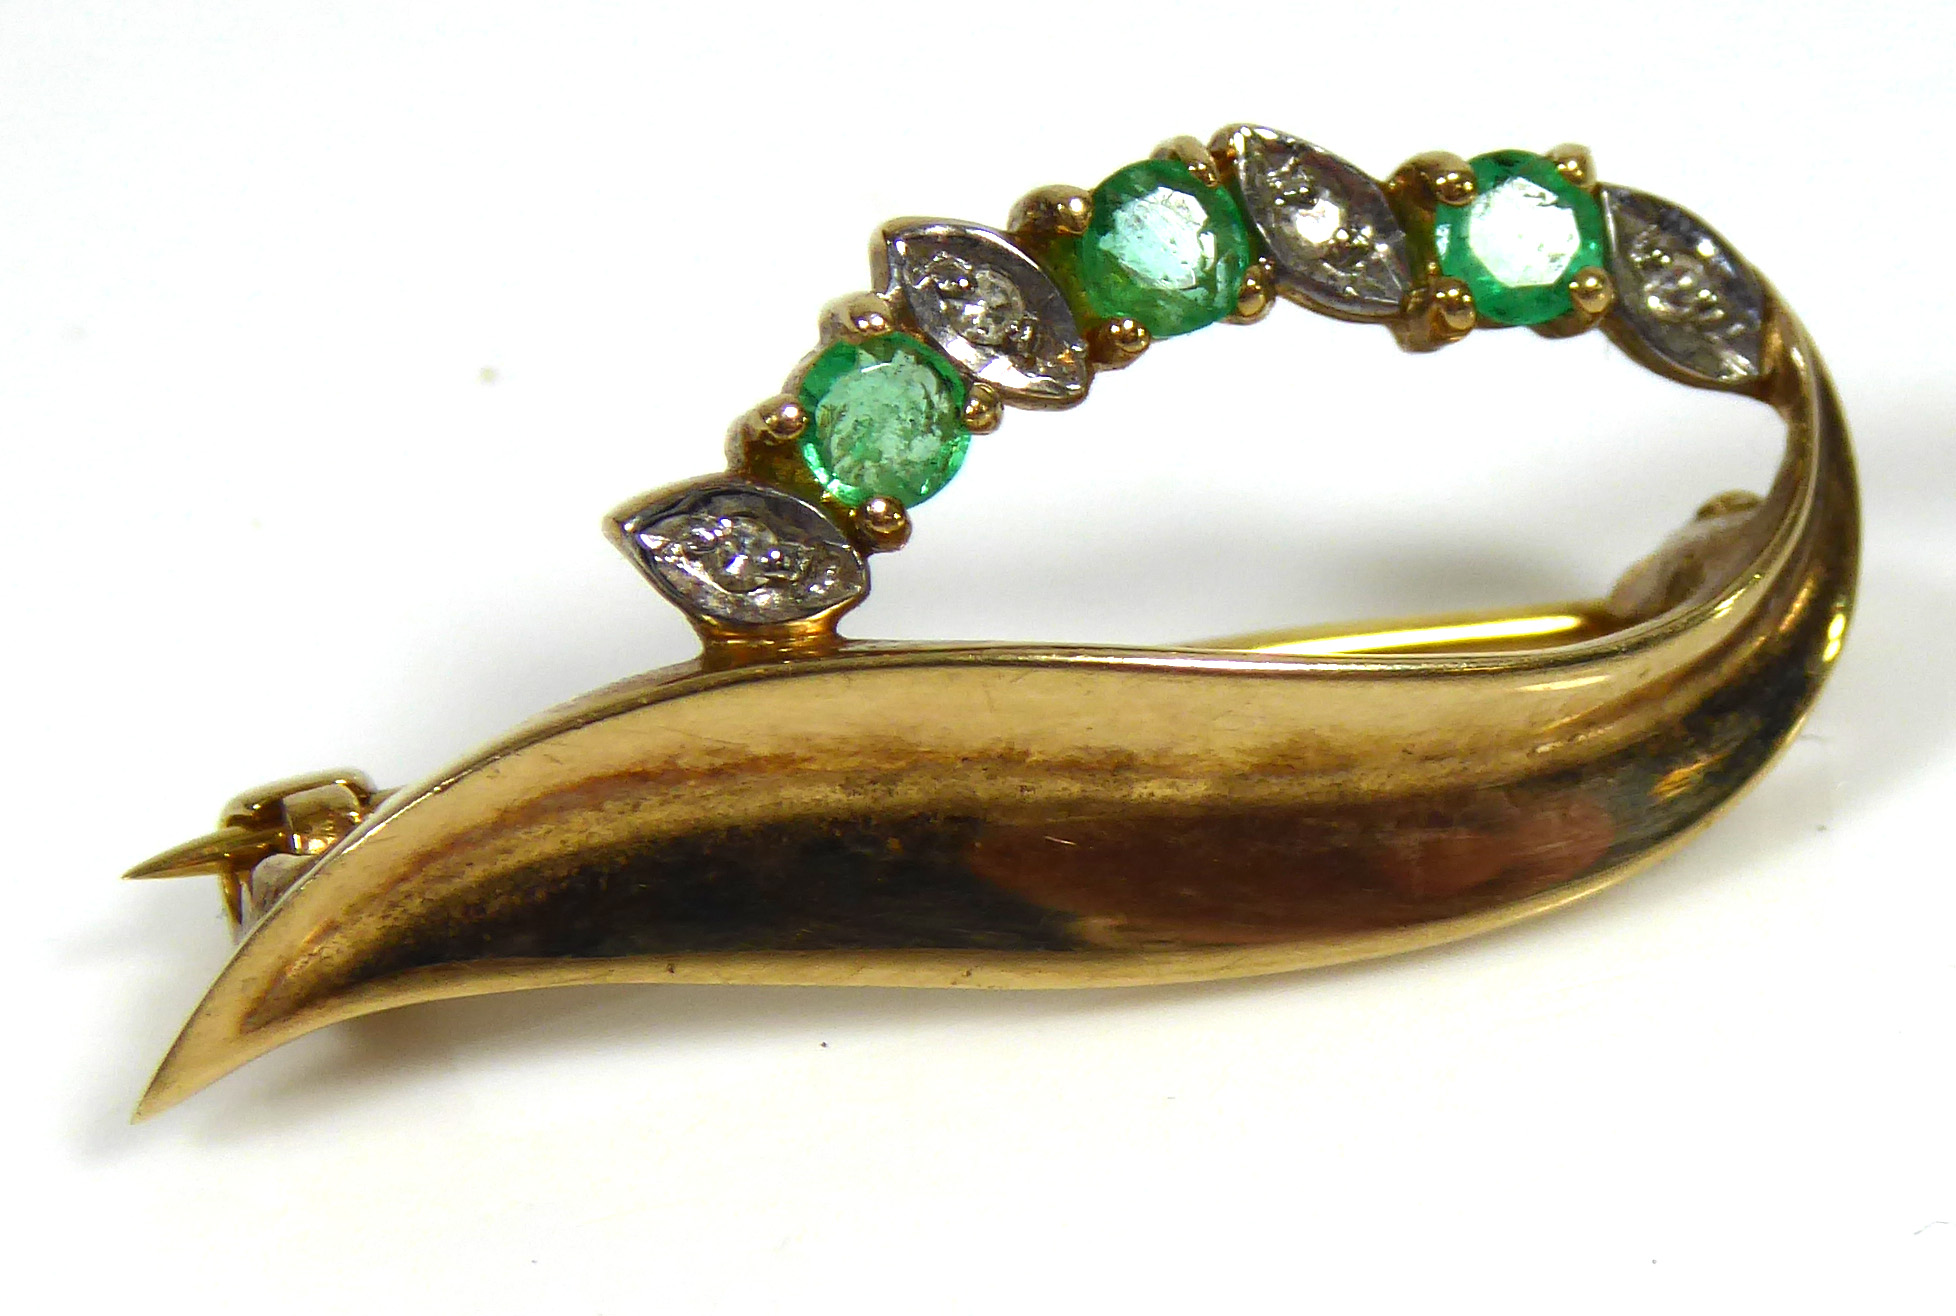 A VINTAGE 9CT GOLD, DIAMOND AND EMERALD BROOCH Set with three round cut emeralds interspersed with - Image 2 of 2